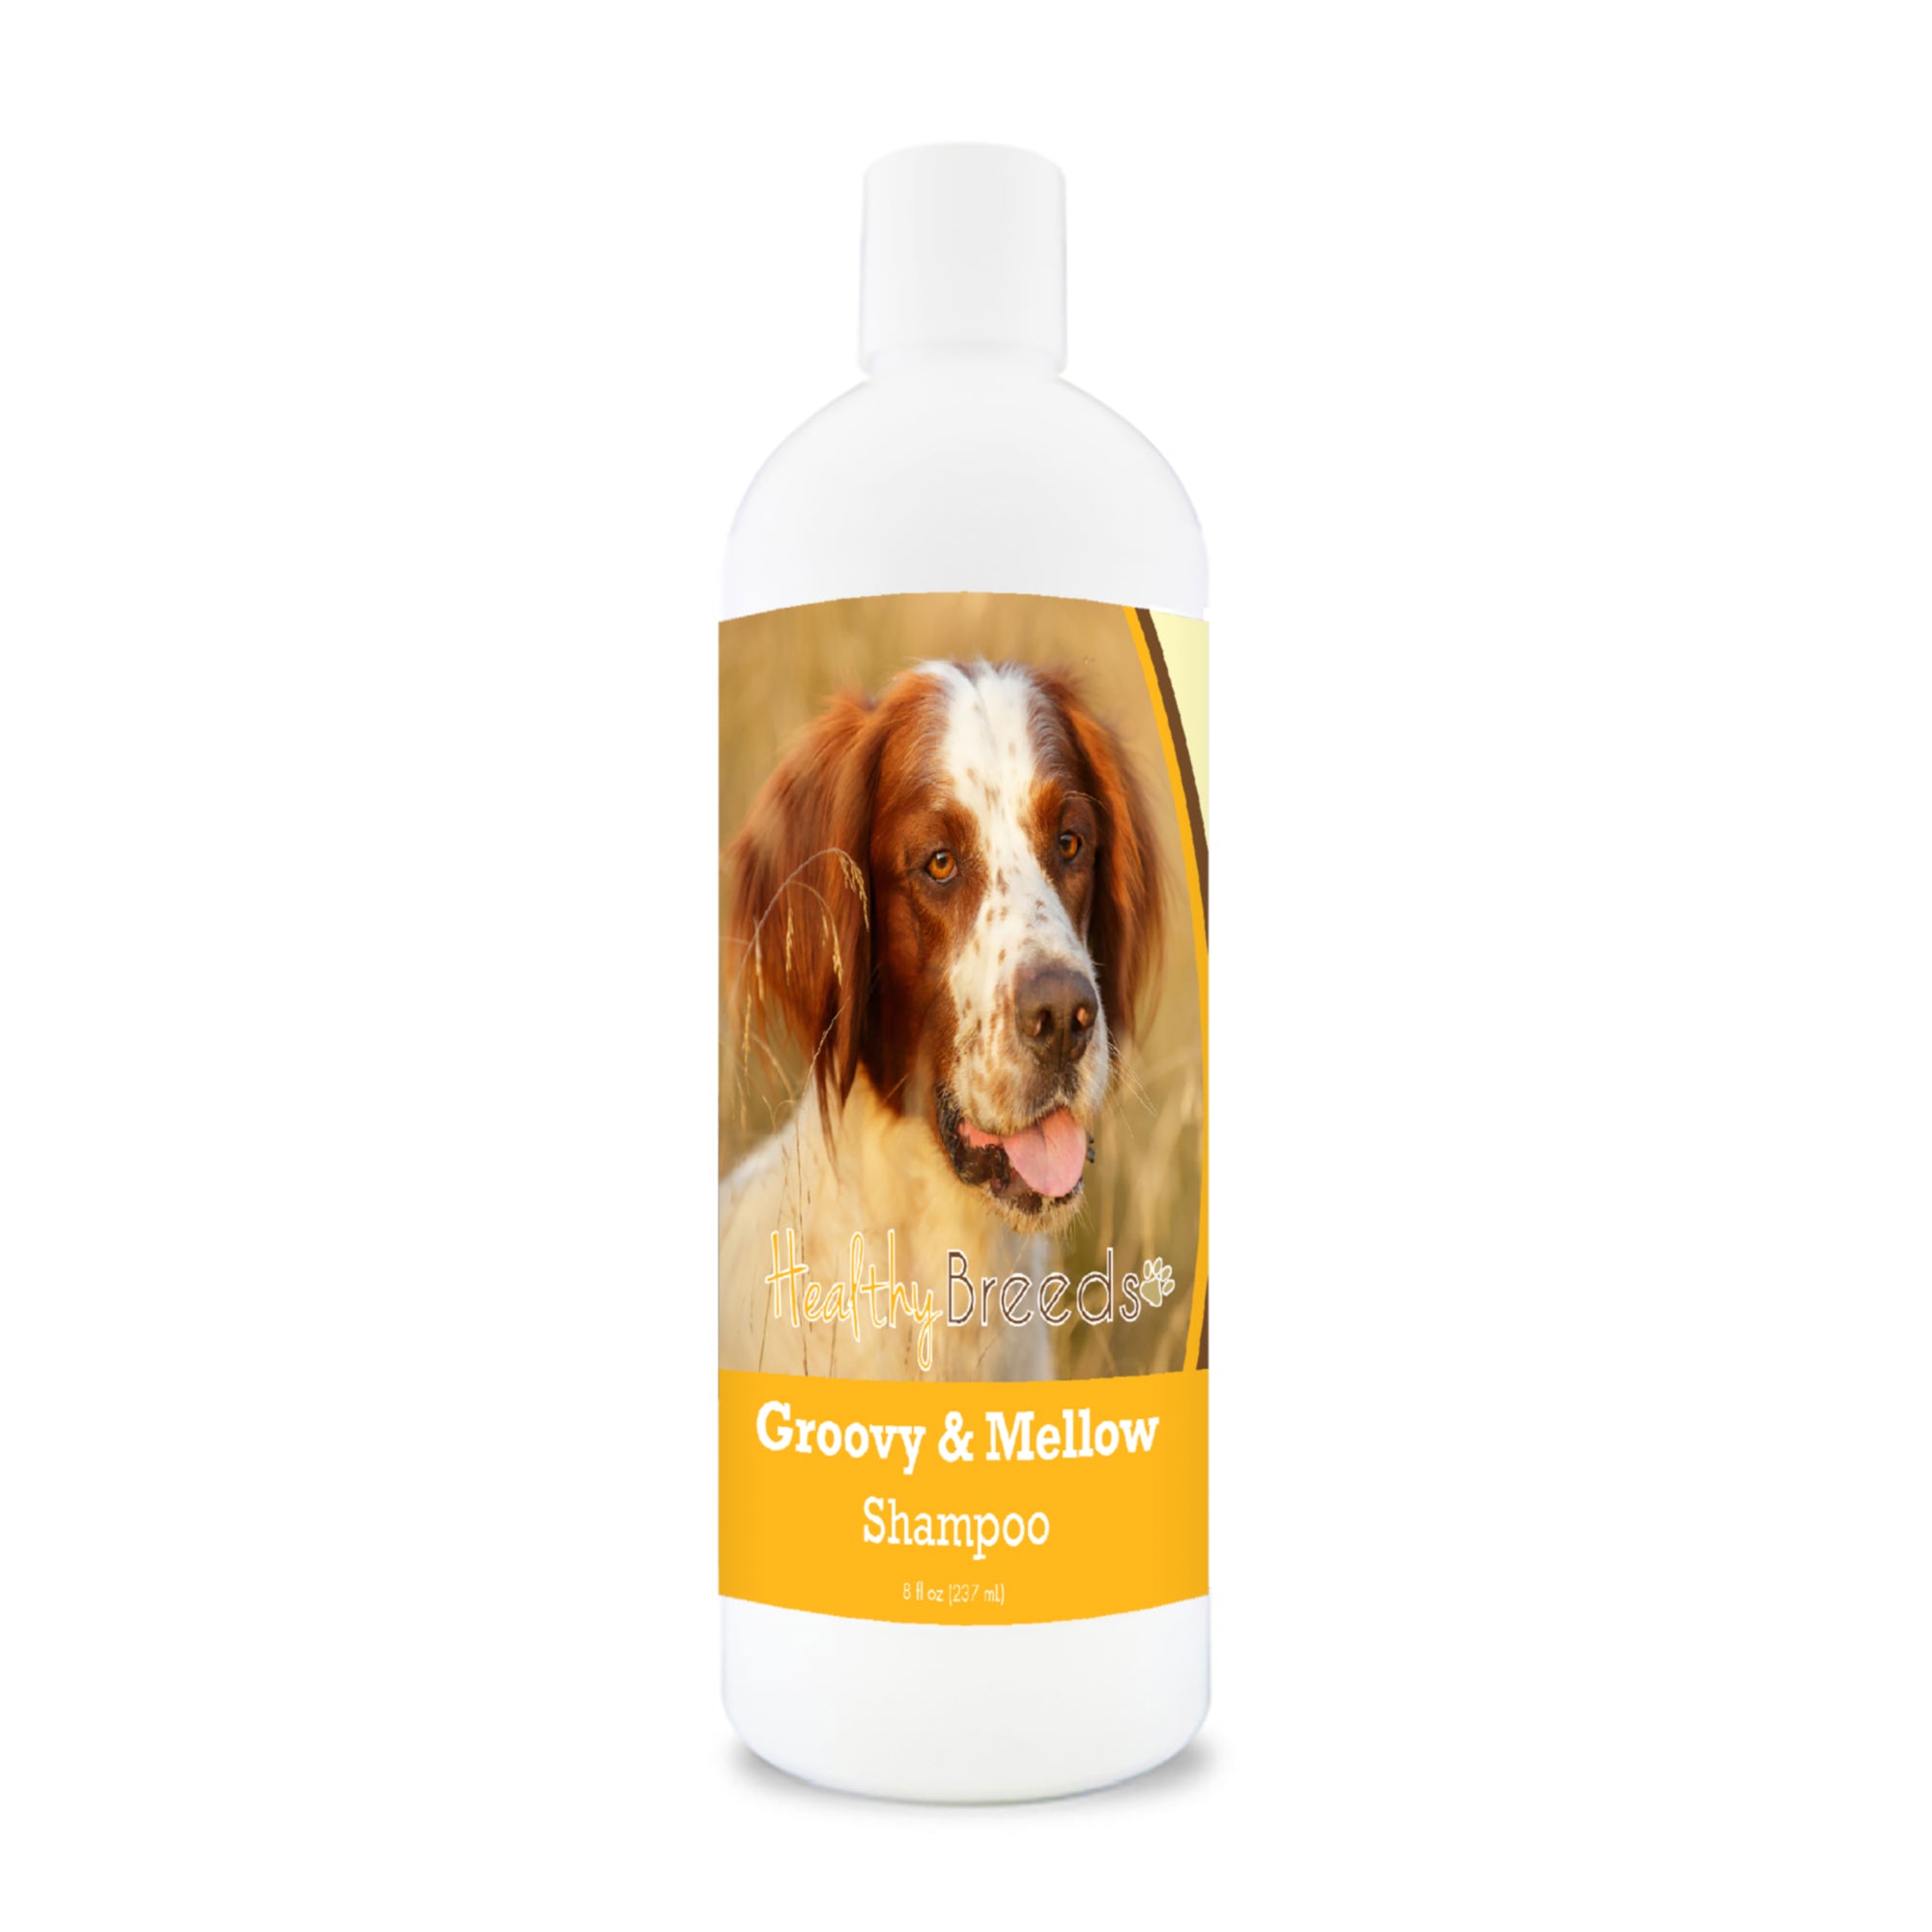 Irish Red and White Setter Groovy & Mellow Shampoo 8 oz